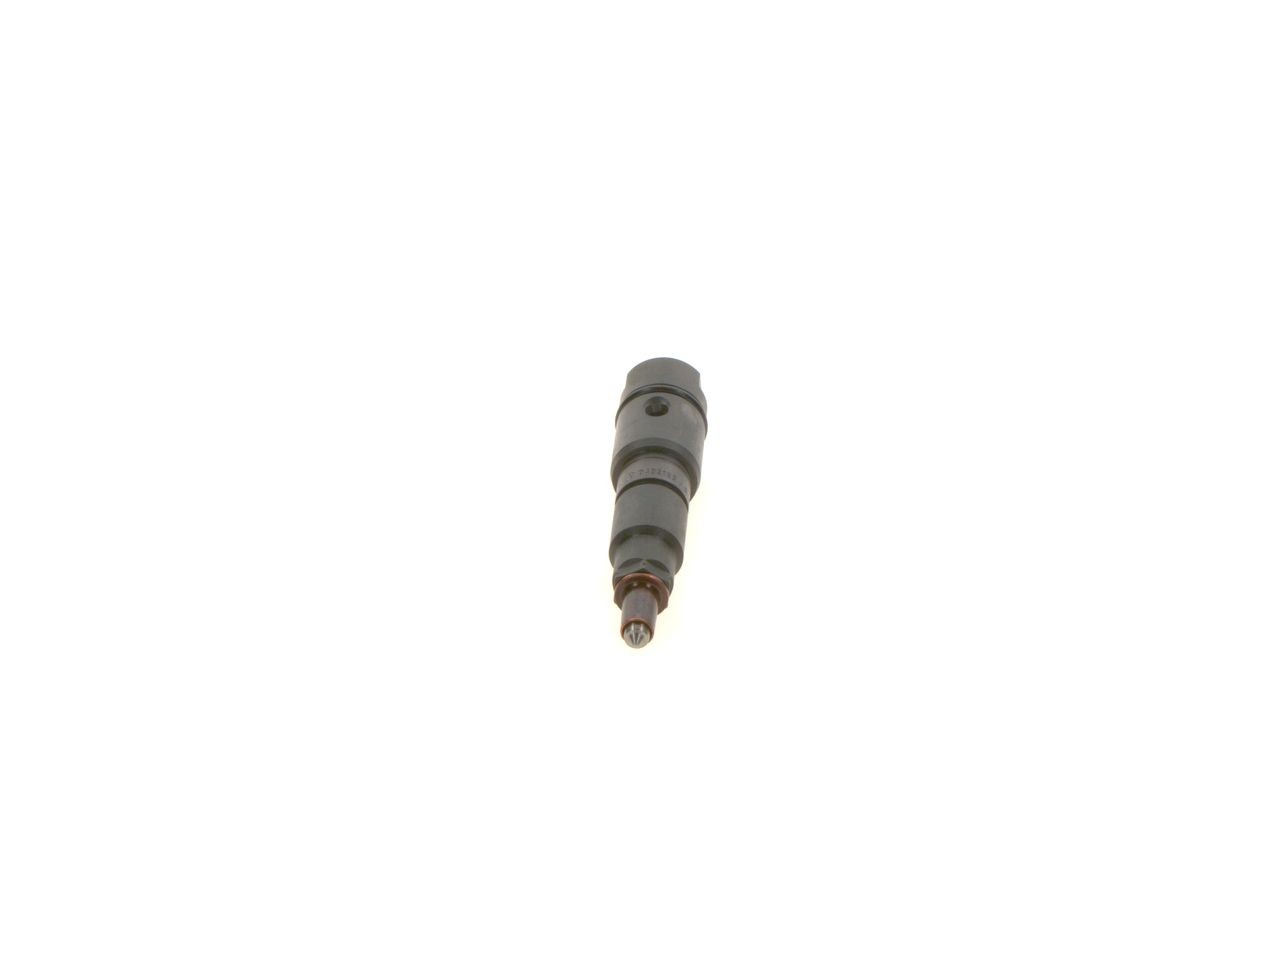 BOSCH Nozzle and Holder Assembly 0 432 193 481